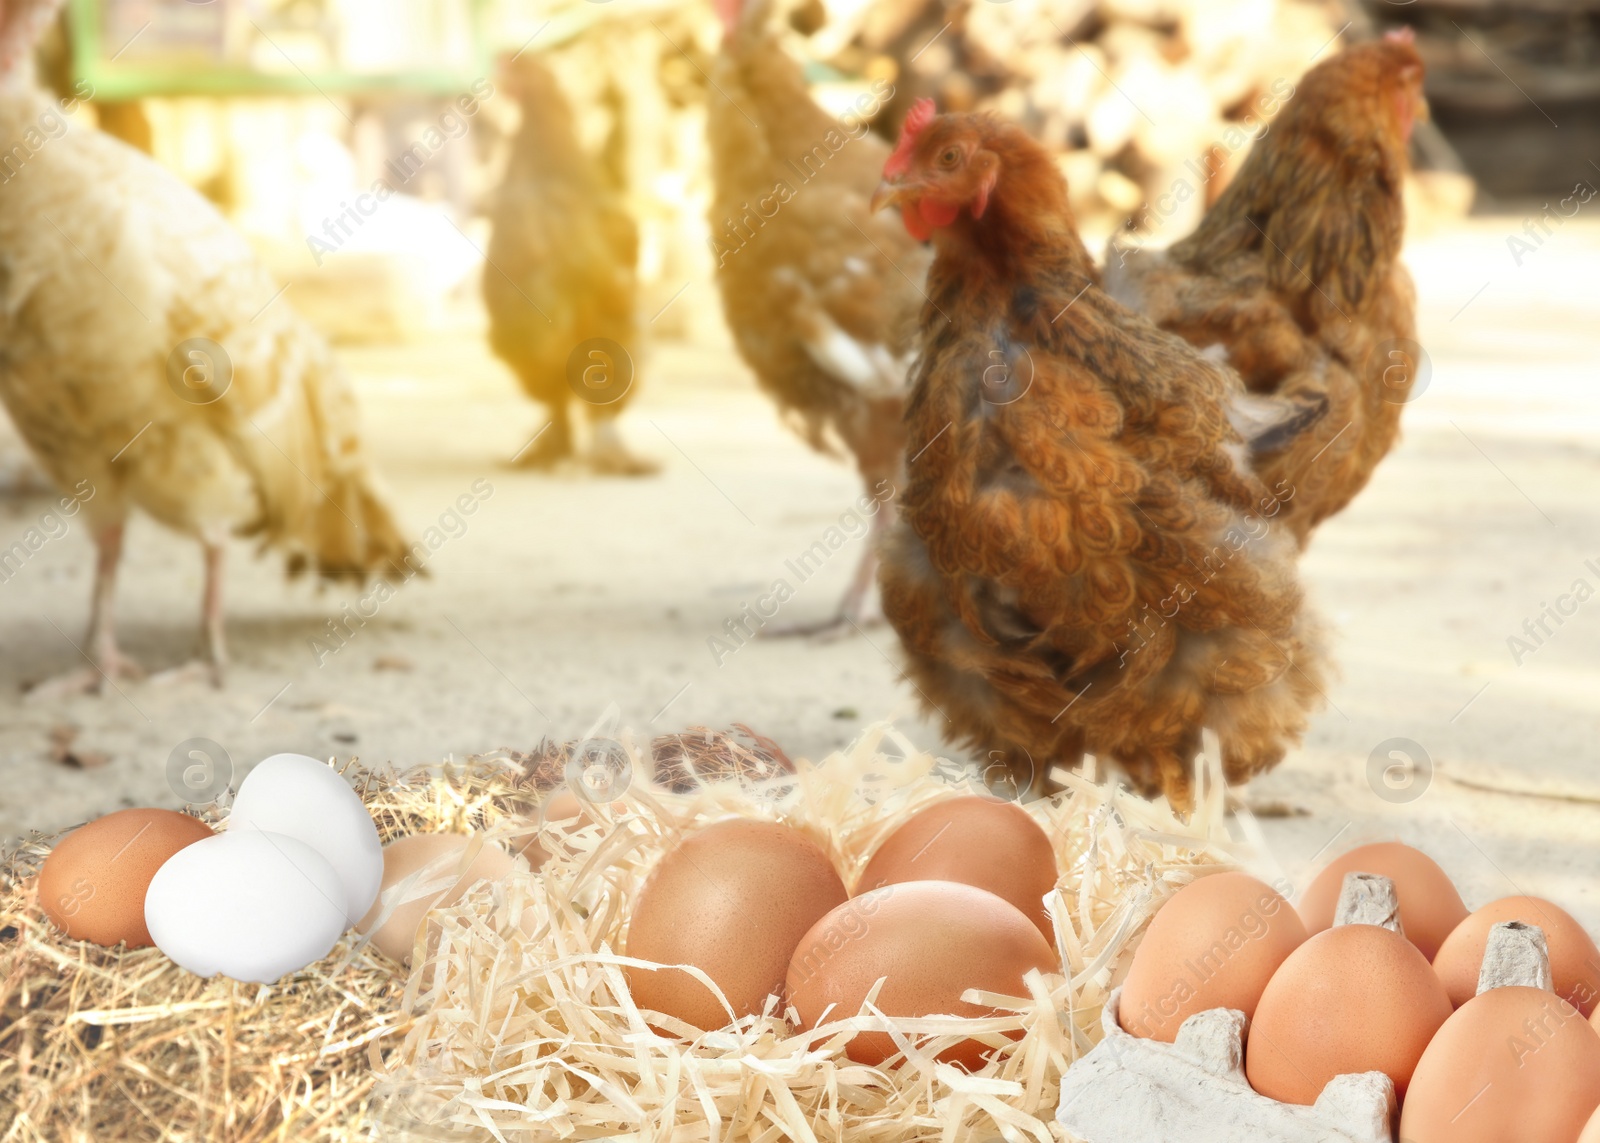 Image of Fresh raw eggs and chickens on farm